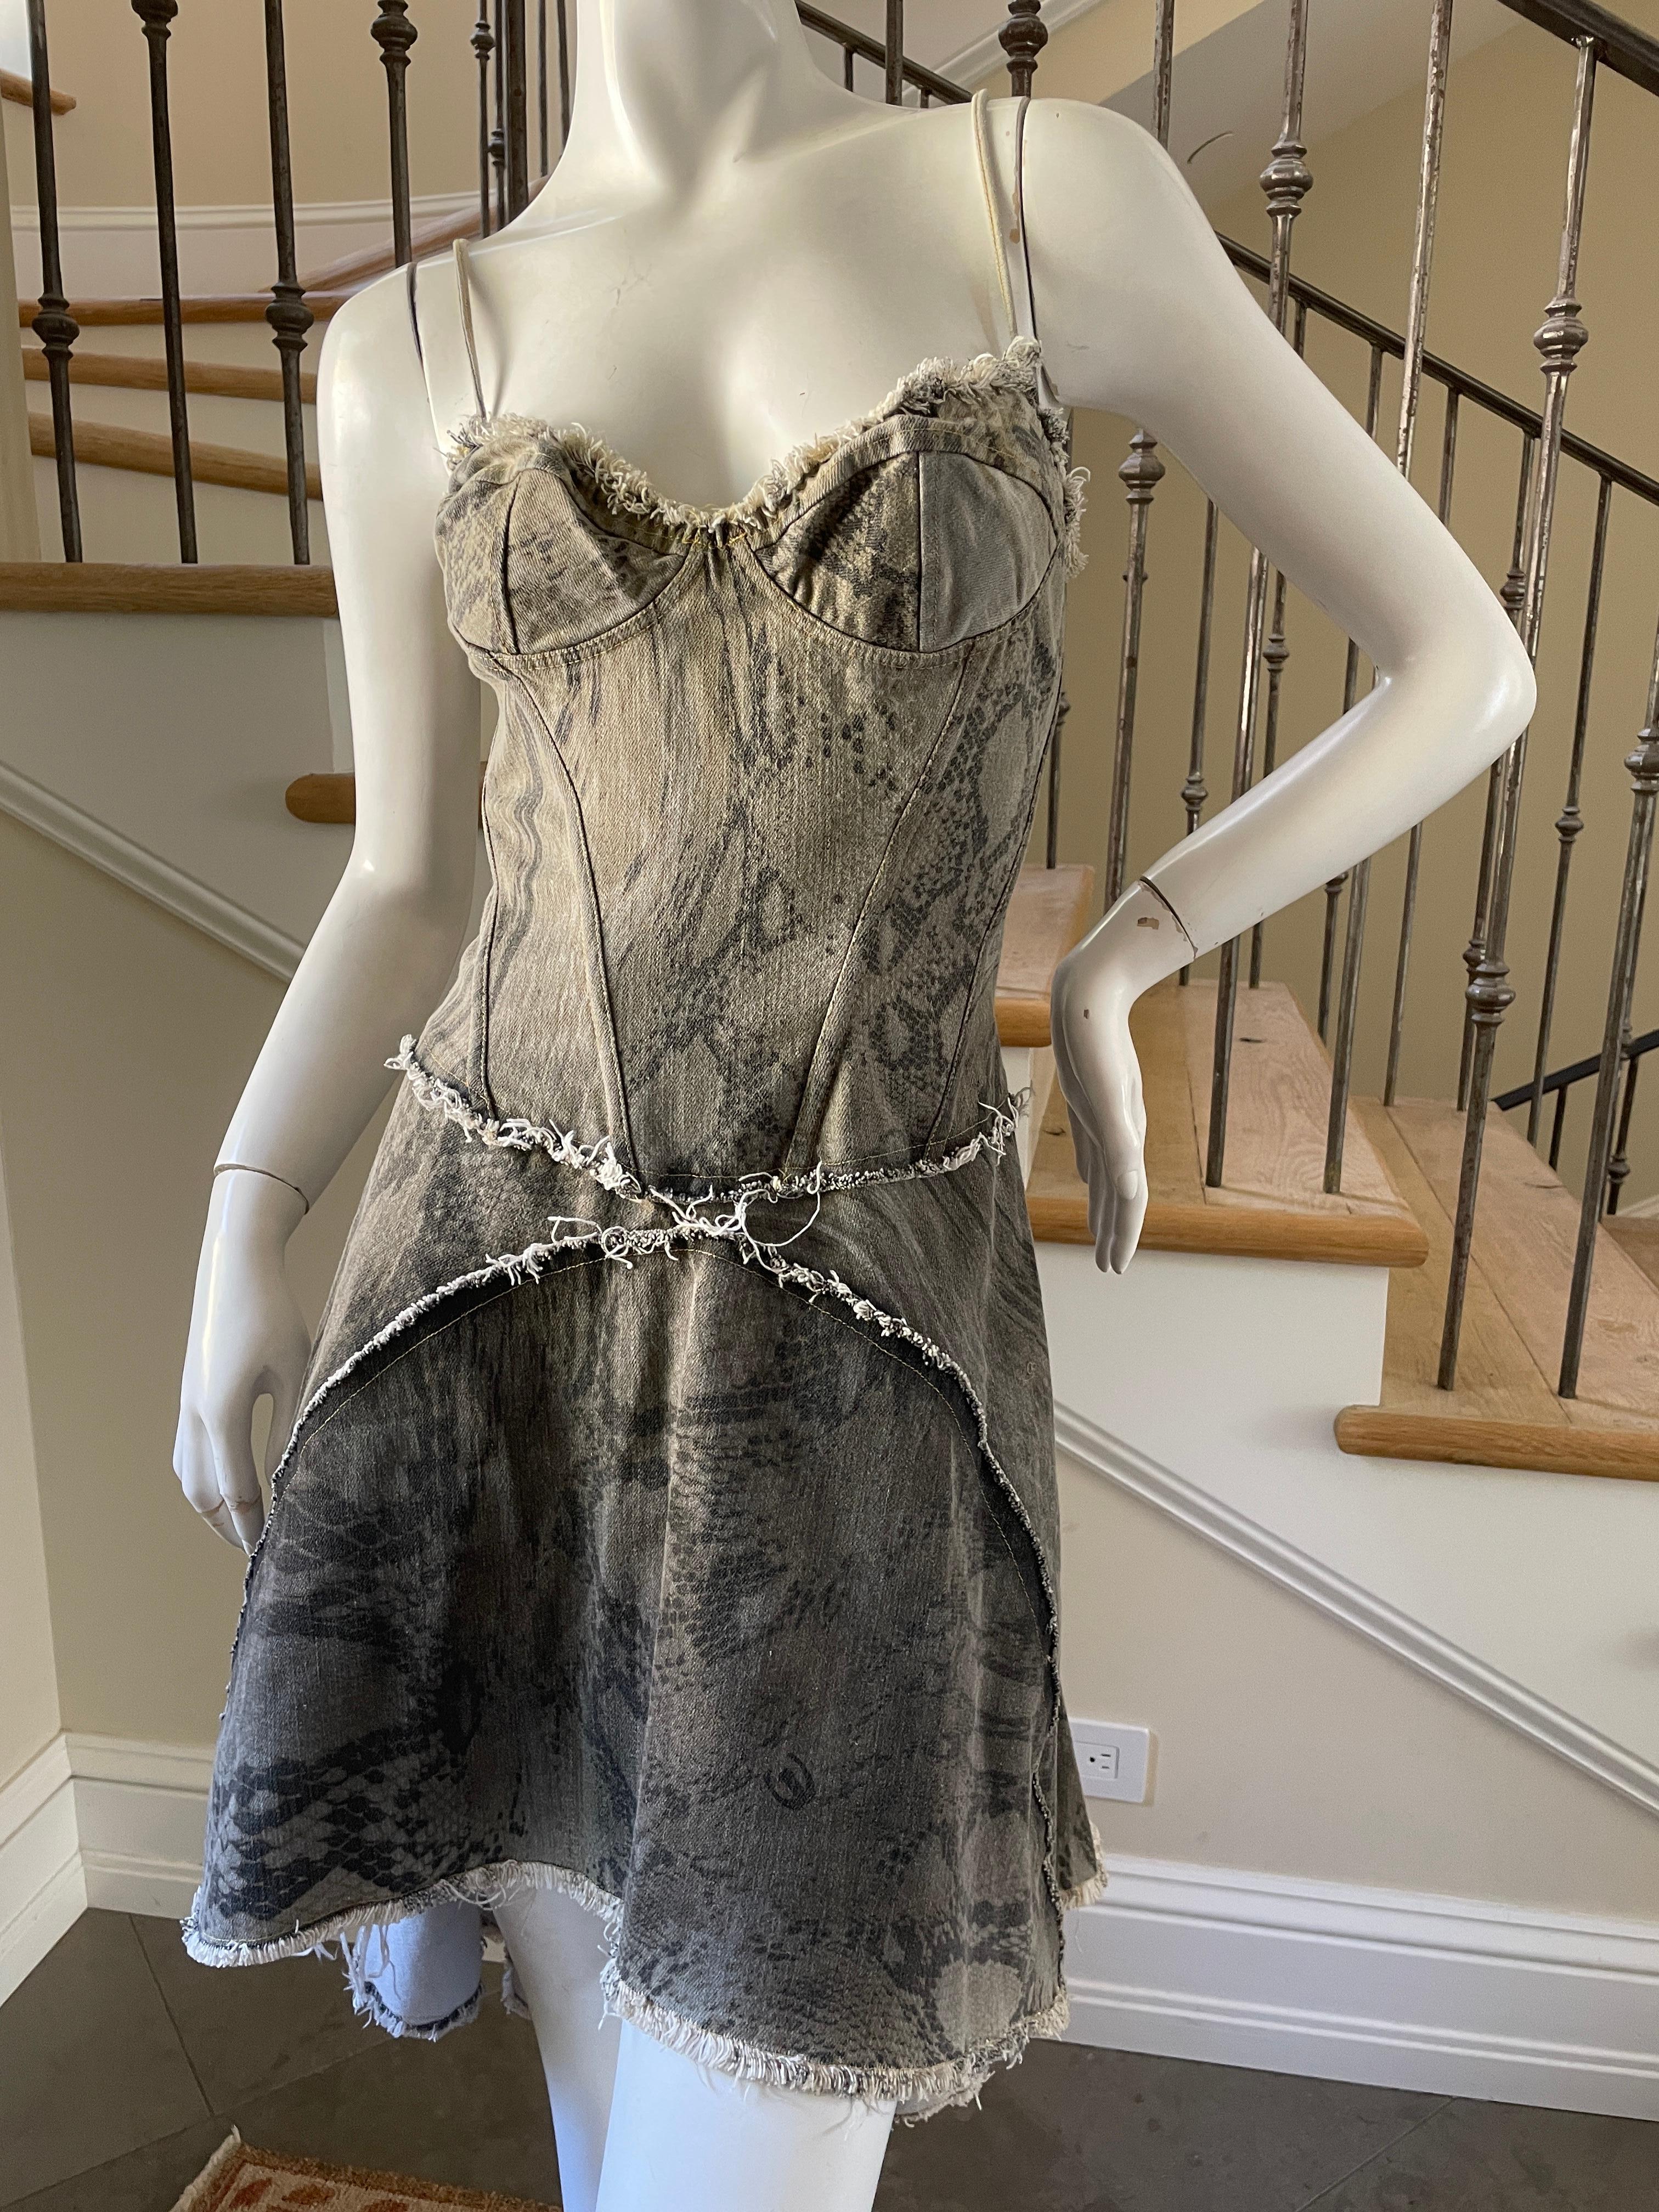 Just Cavalli Vintage Cotton Denim Snake Print Corset Dress by Roberto Cavalli
 Sz 42
 This is so pretty, looks better on live model.
Bust 36